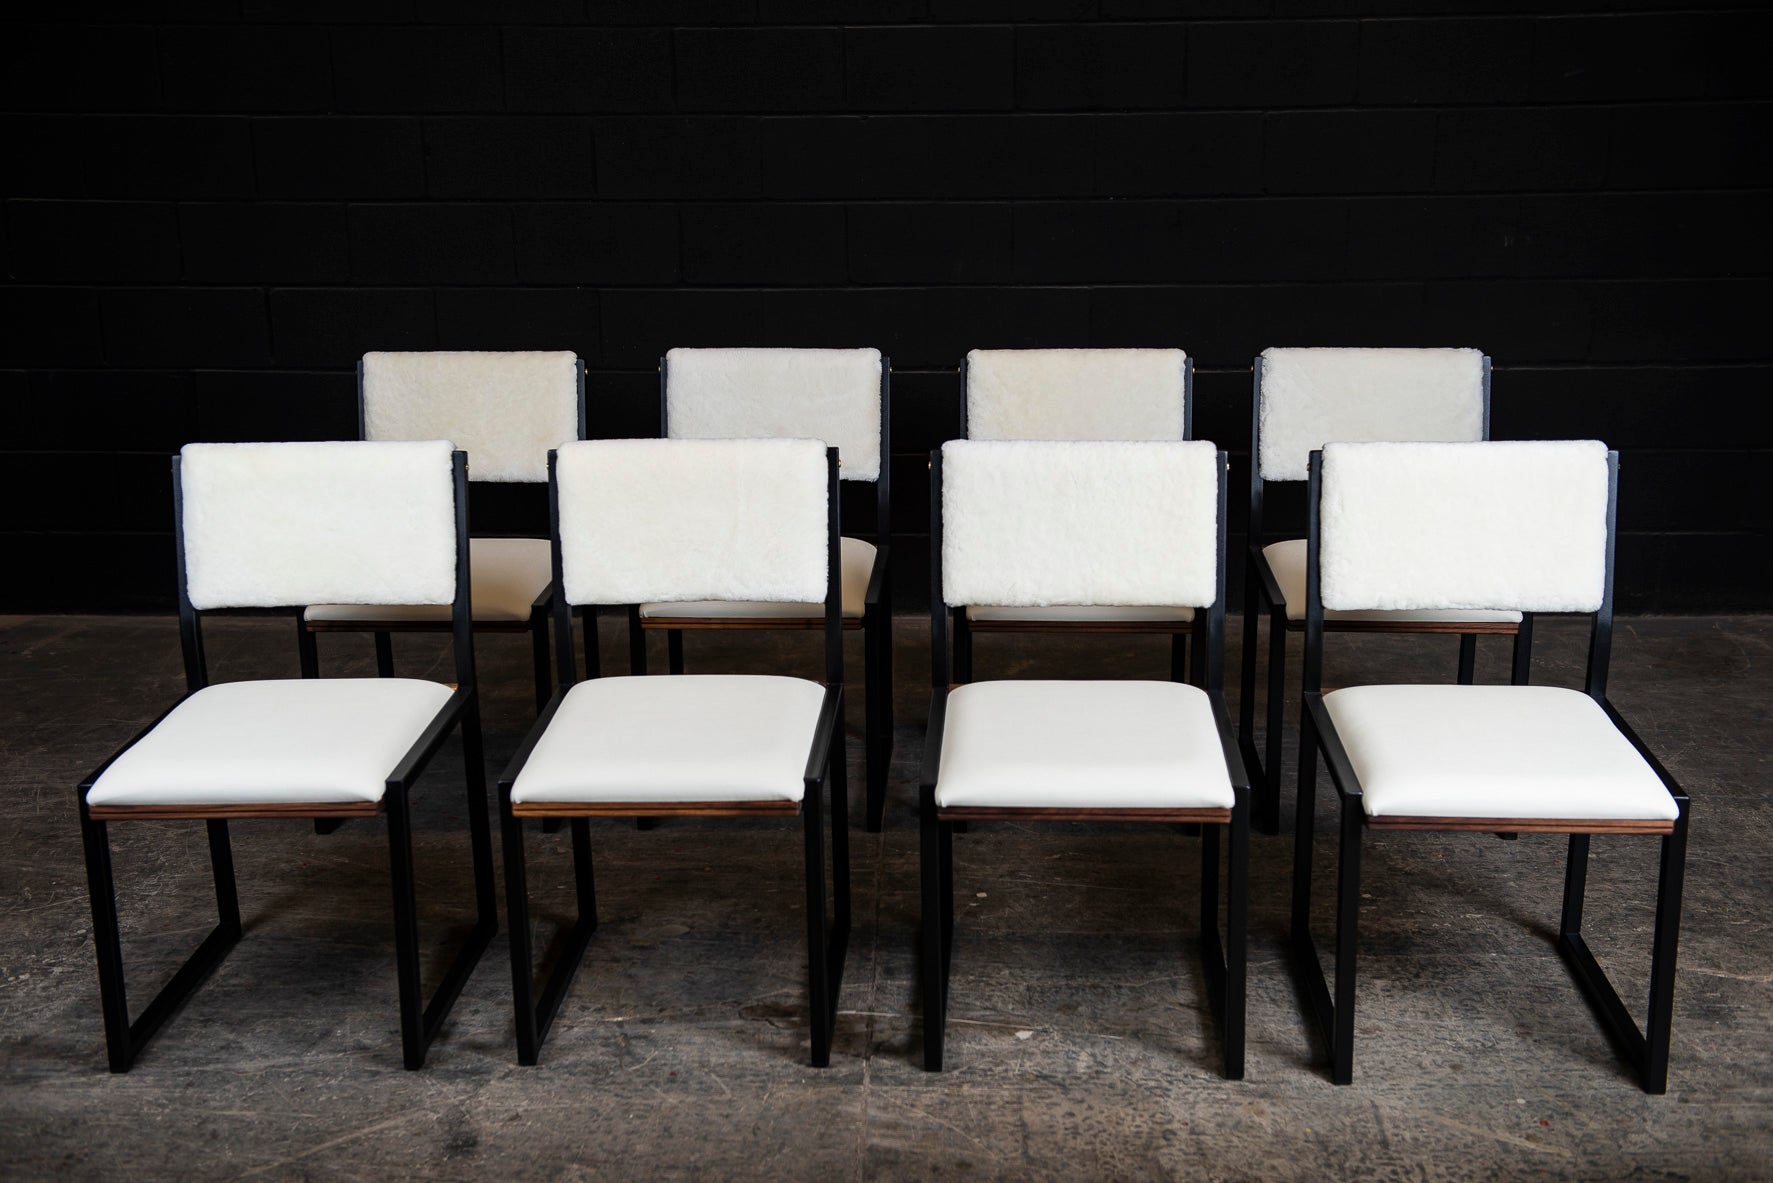 Shaker Side Chair - Brisa Cream Shearling & White Leather